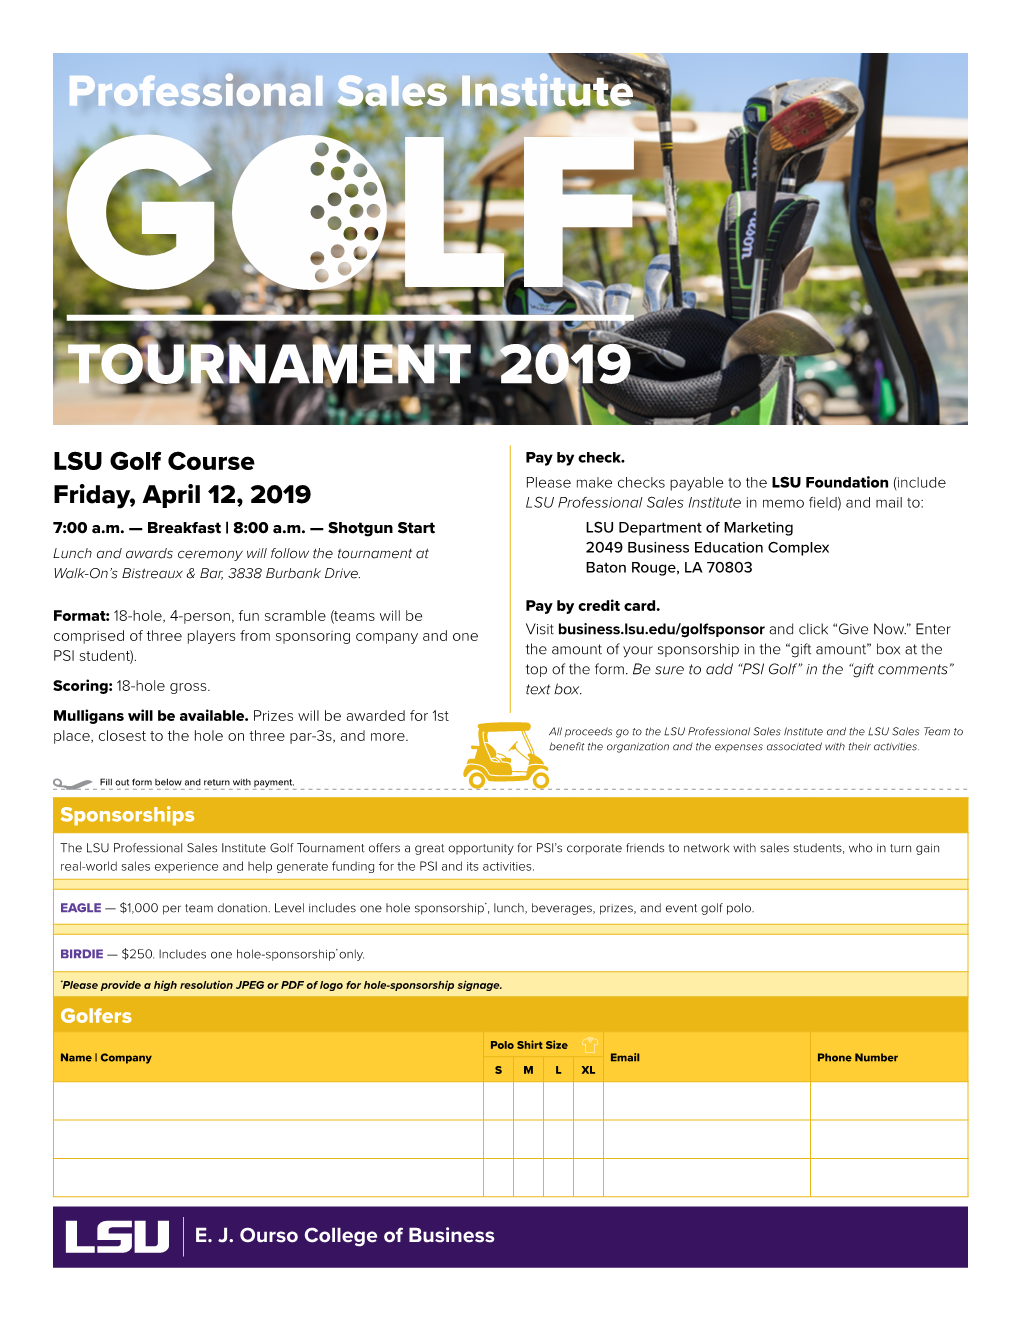 Professional Sales Institute Golf Tournament 2019 Entry Form